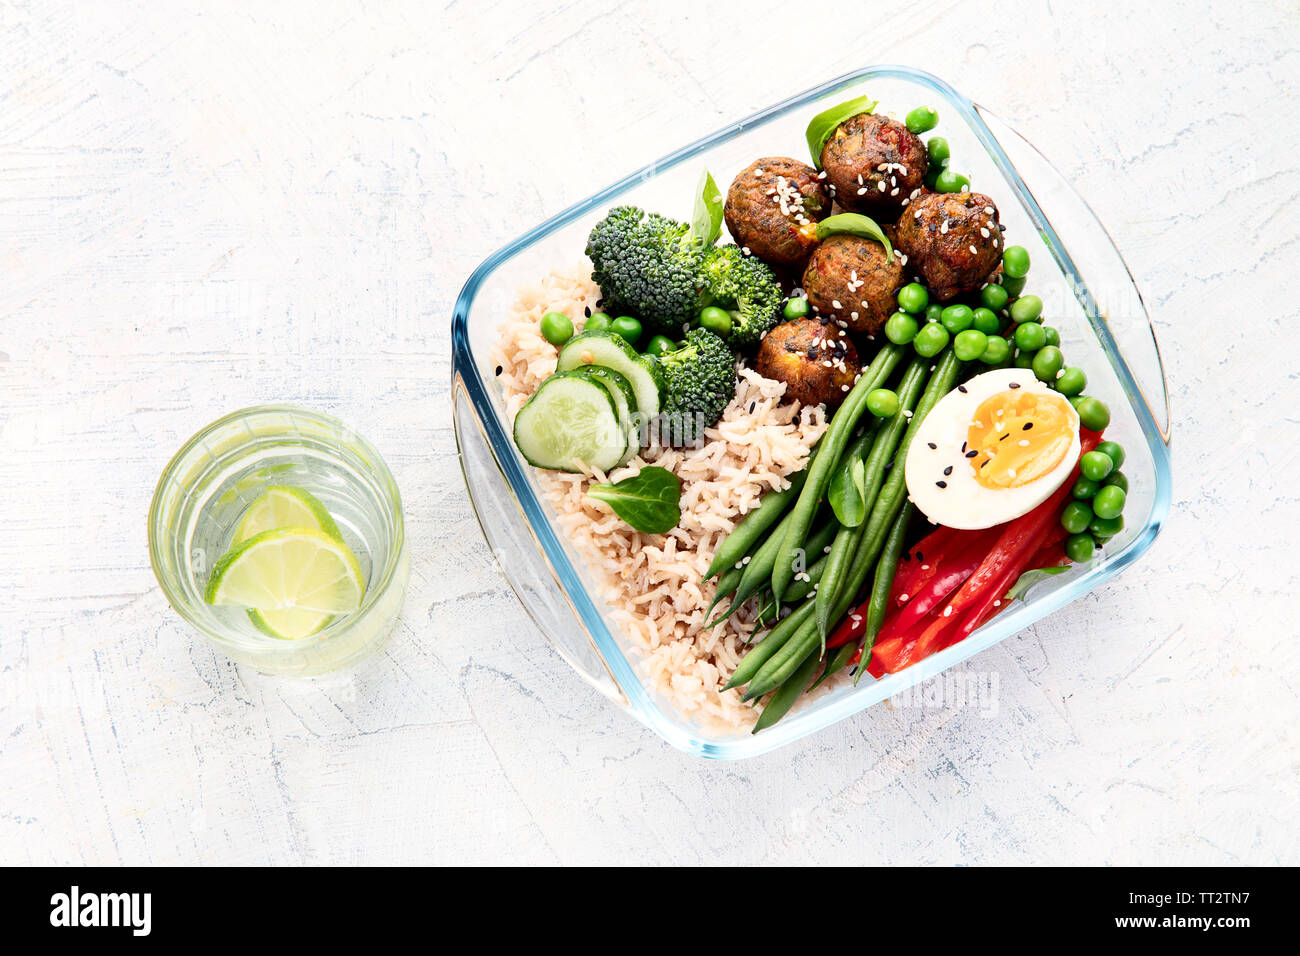 Healthy lunch box. Asian style food Stock Photo - Alamy